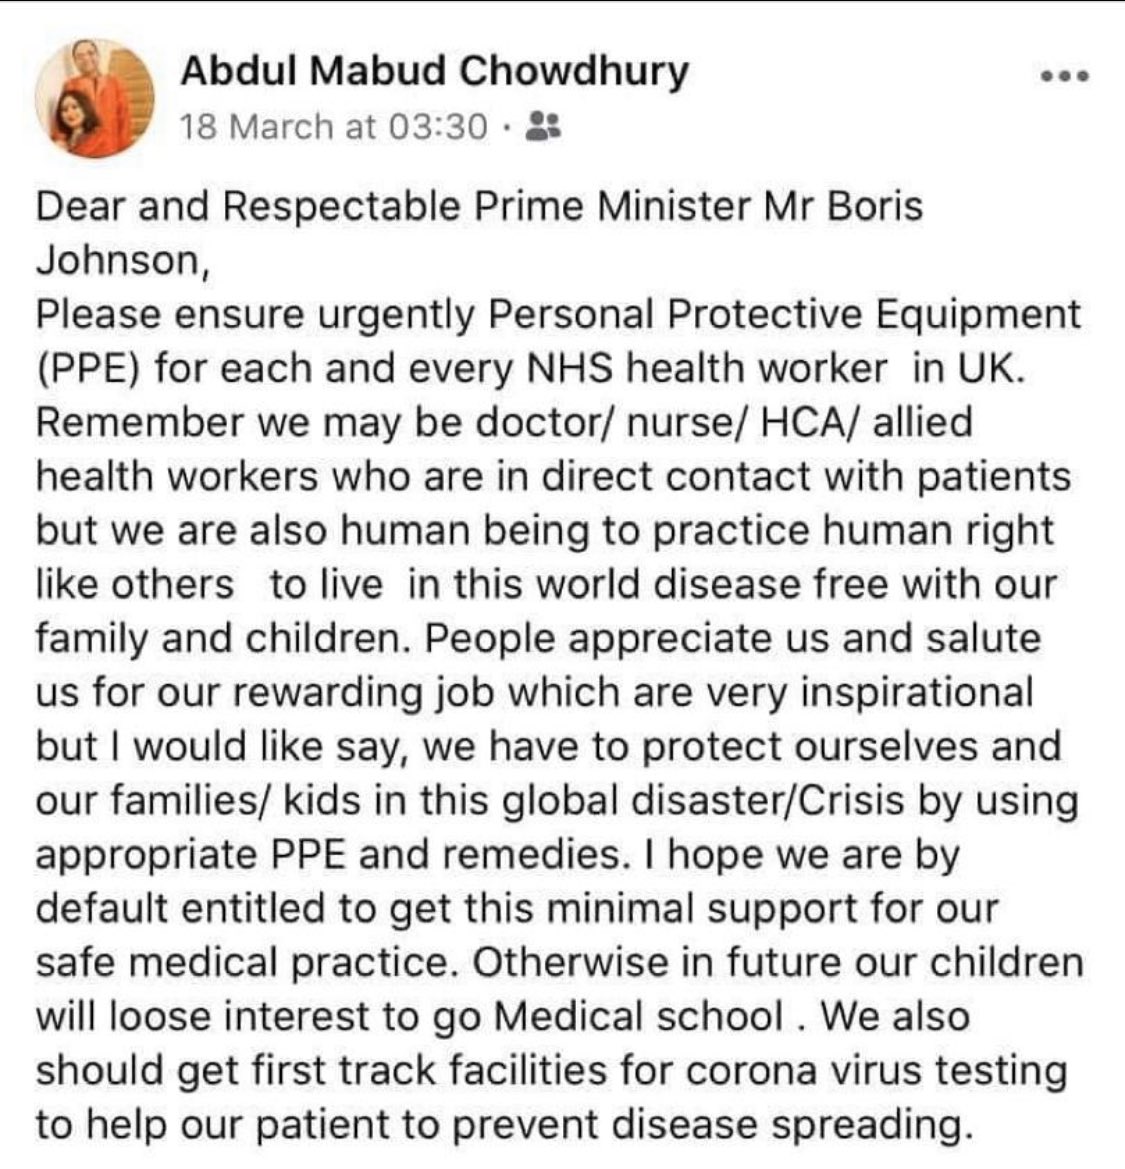 Dr Chowdhury appealed for more PPE just weeks ago, “Please ensure urgently PPE for each and every health worker in UK...People appreciate us and salute us for our rewarding job...but we have to protects ourselves, our families and our kids,” he said in a Facebook post.  #COVIDー19